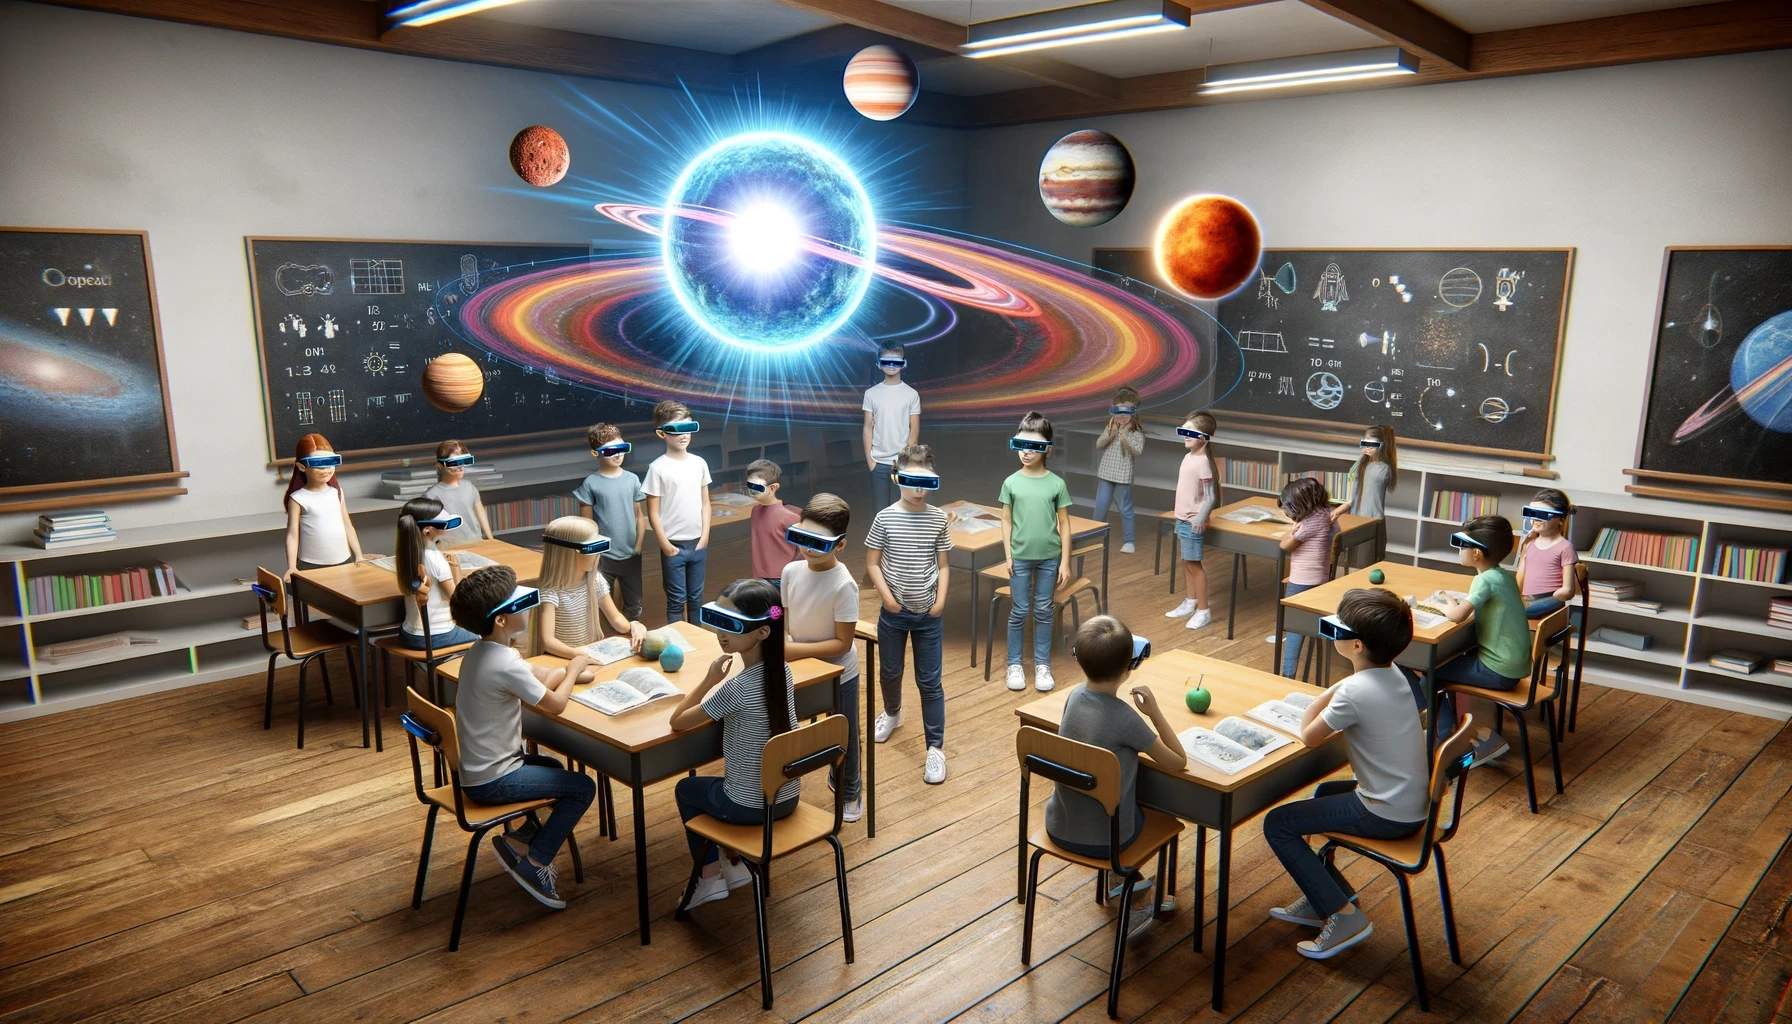 Students in a classroom using augmented reality glasses to explore the solar system. The image shows children of various ages around a holographic display of the solar system, highlighting an interactive and visual way to learn astronomy.